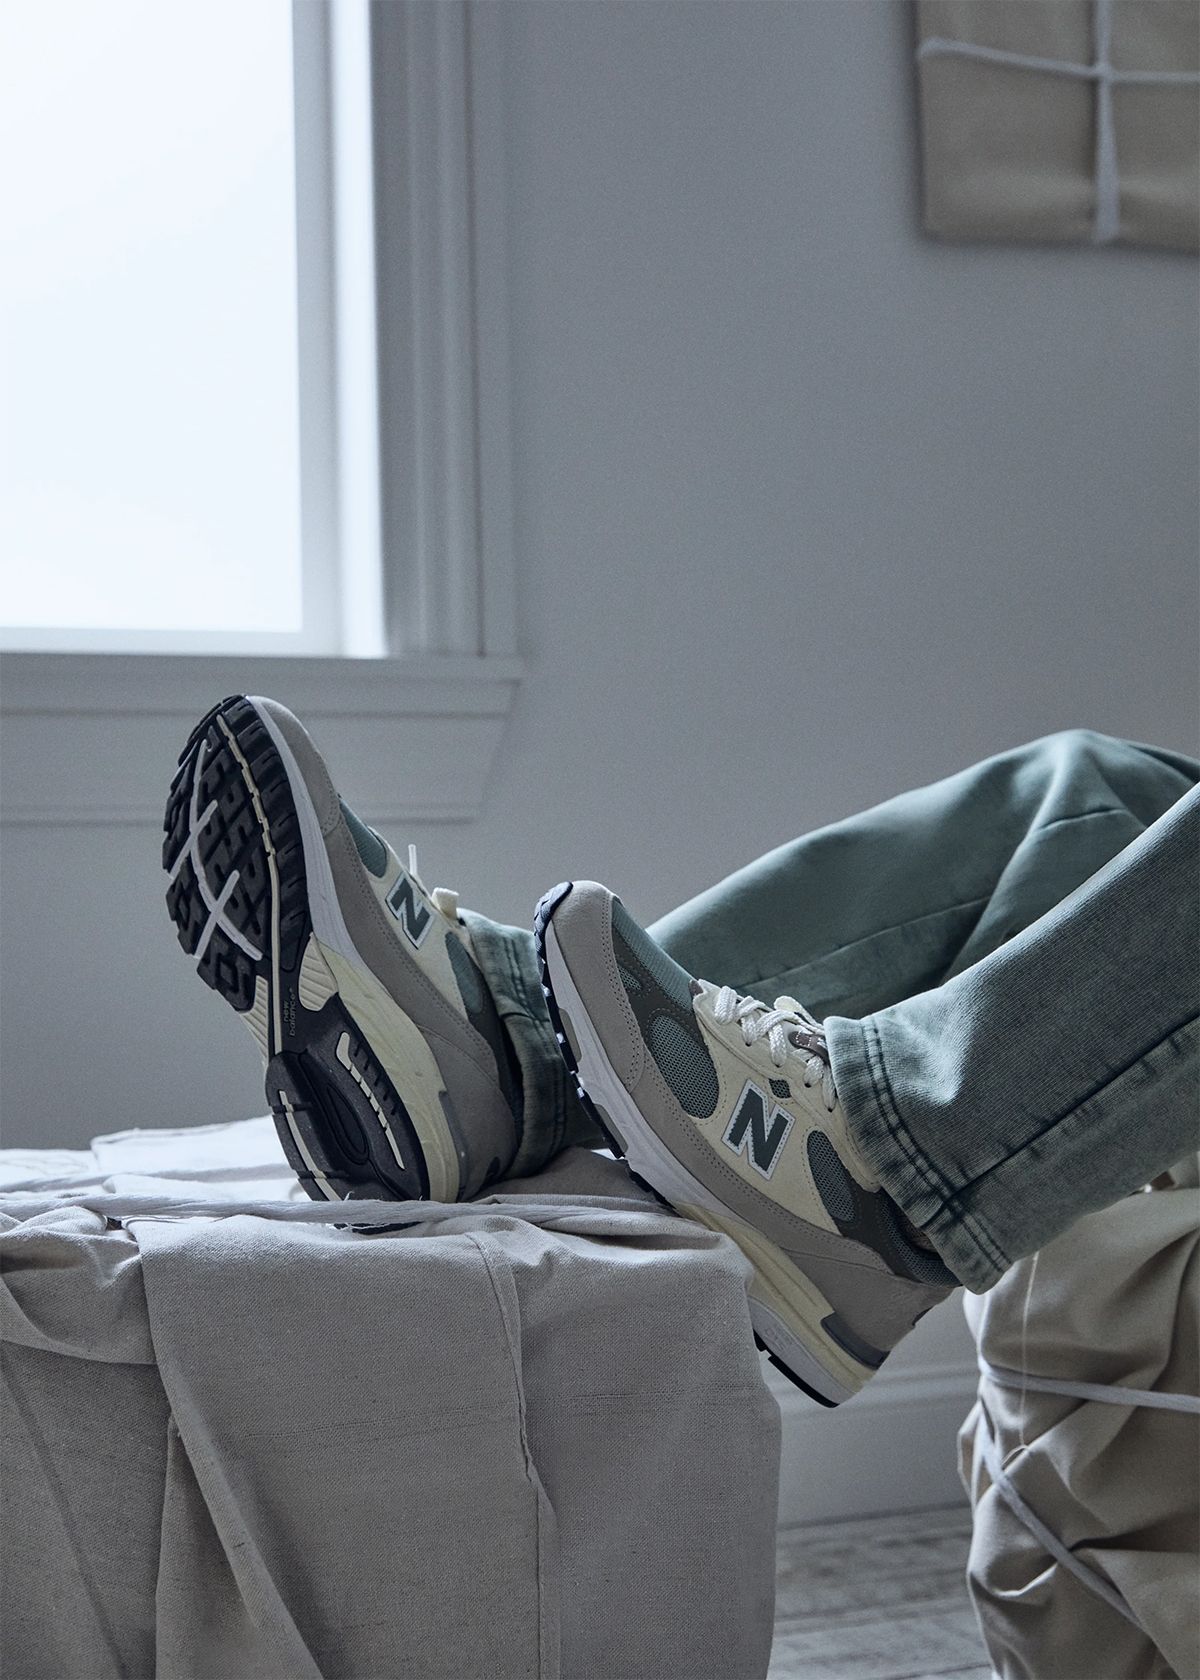 Kith's Spring 101 Collection Features an Exclusive New Balance 993